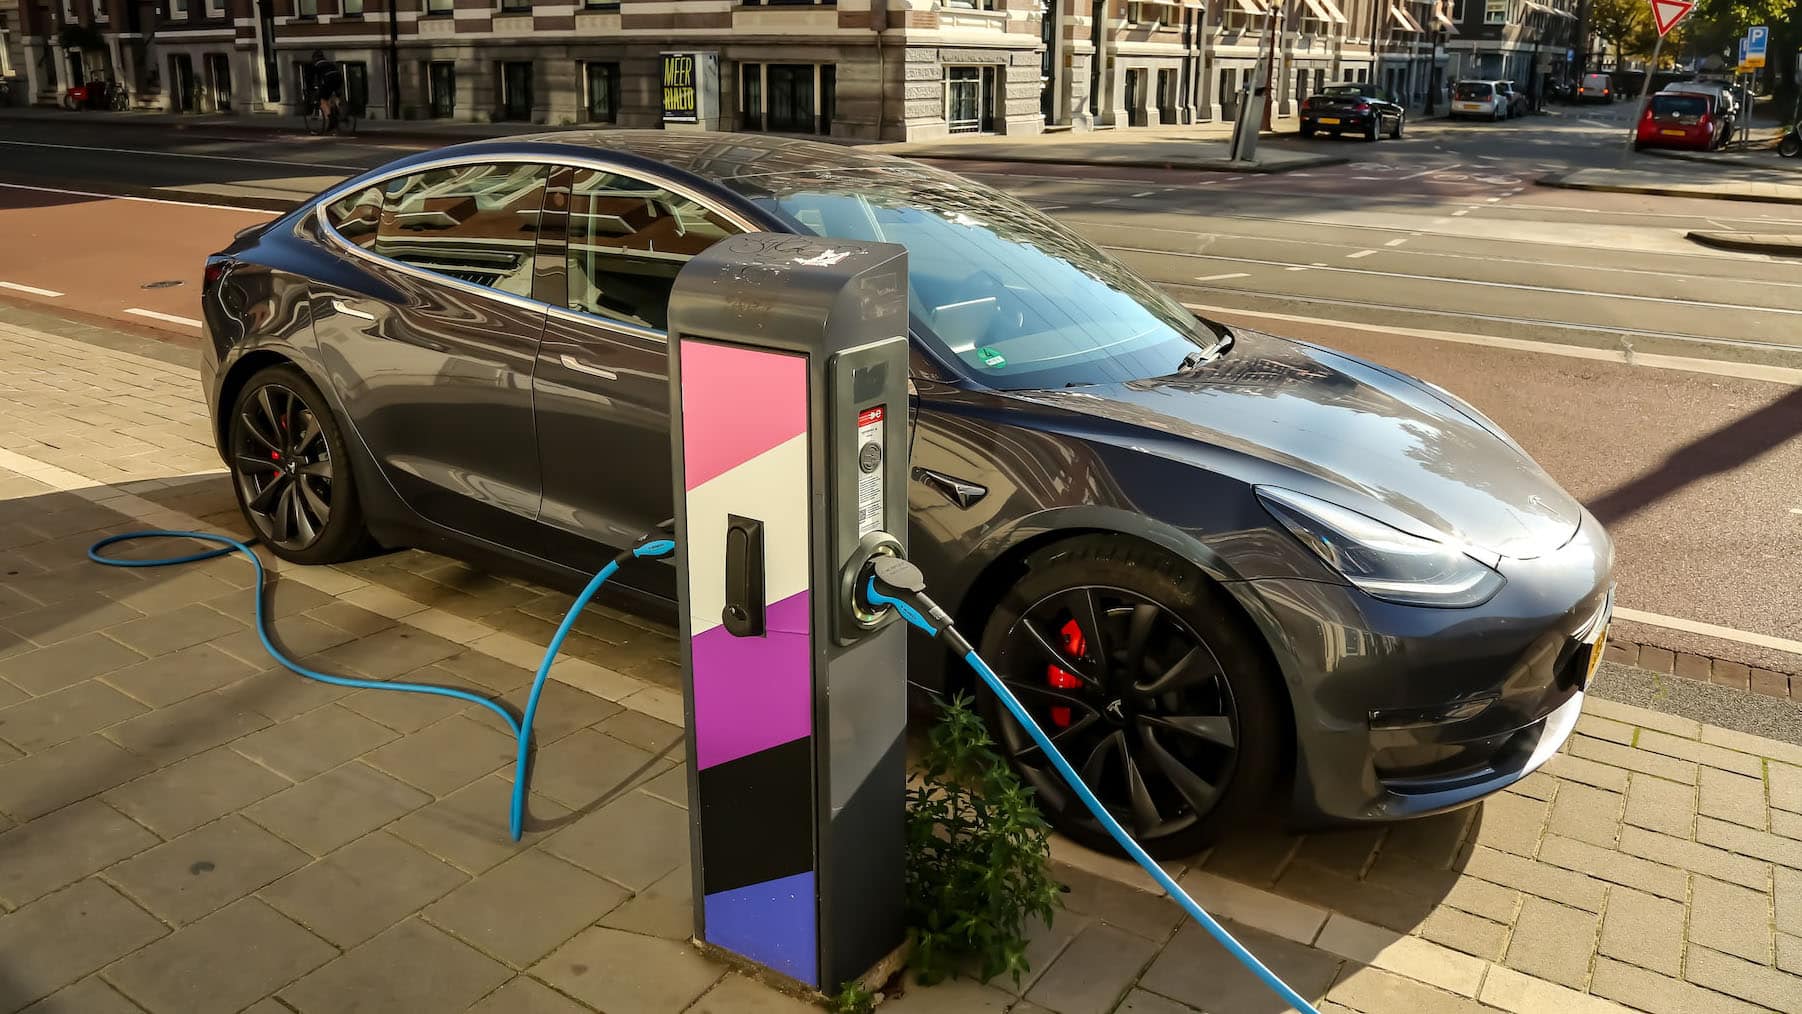 A dark grey, 4-door sedan electric vehicle connected to a charging station.